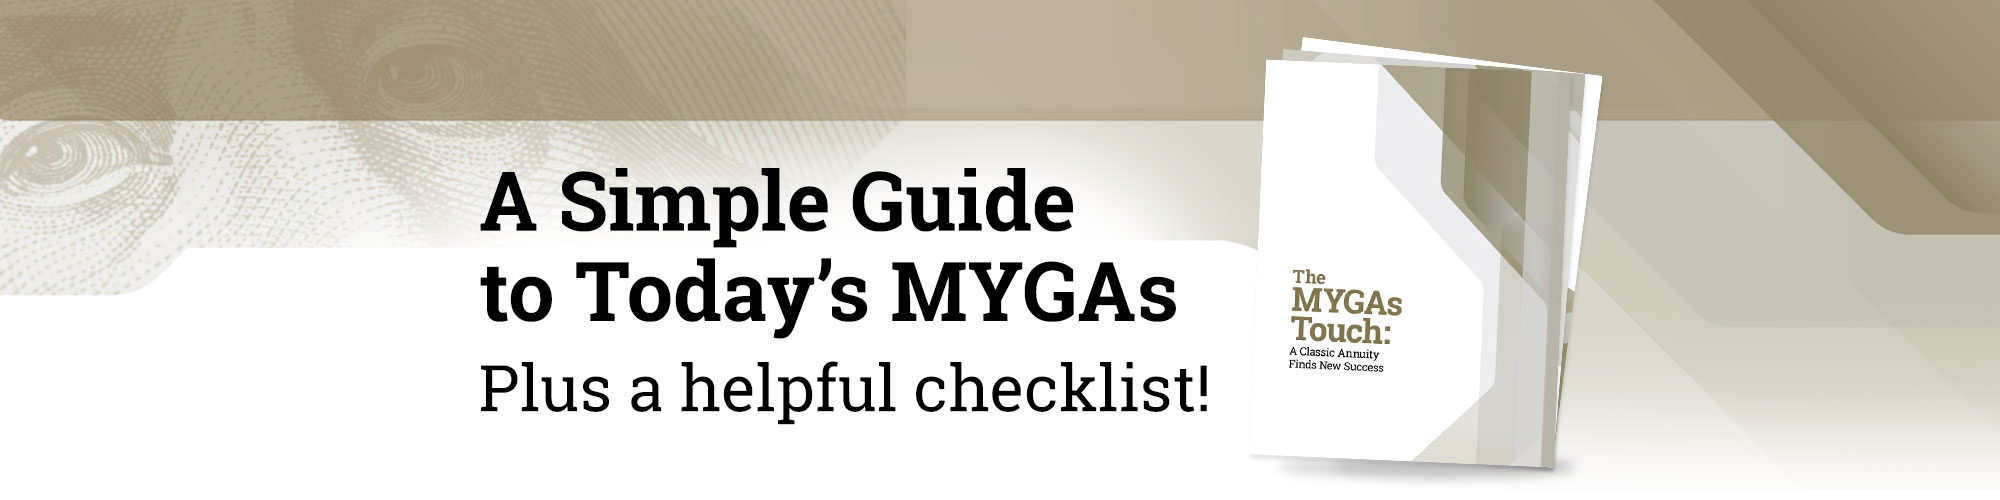 A Simple Guide for Today's MYGA